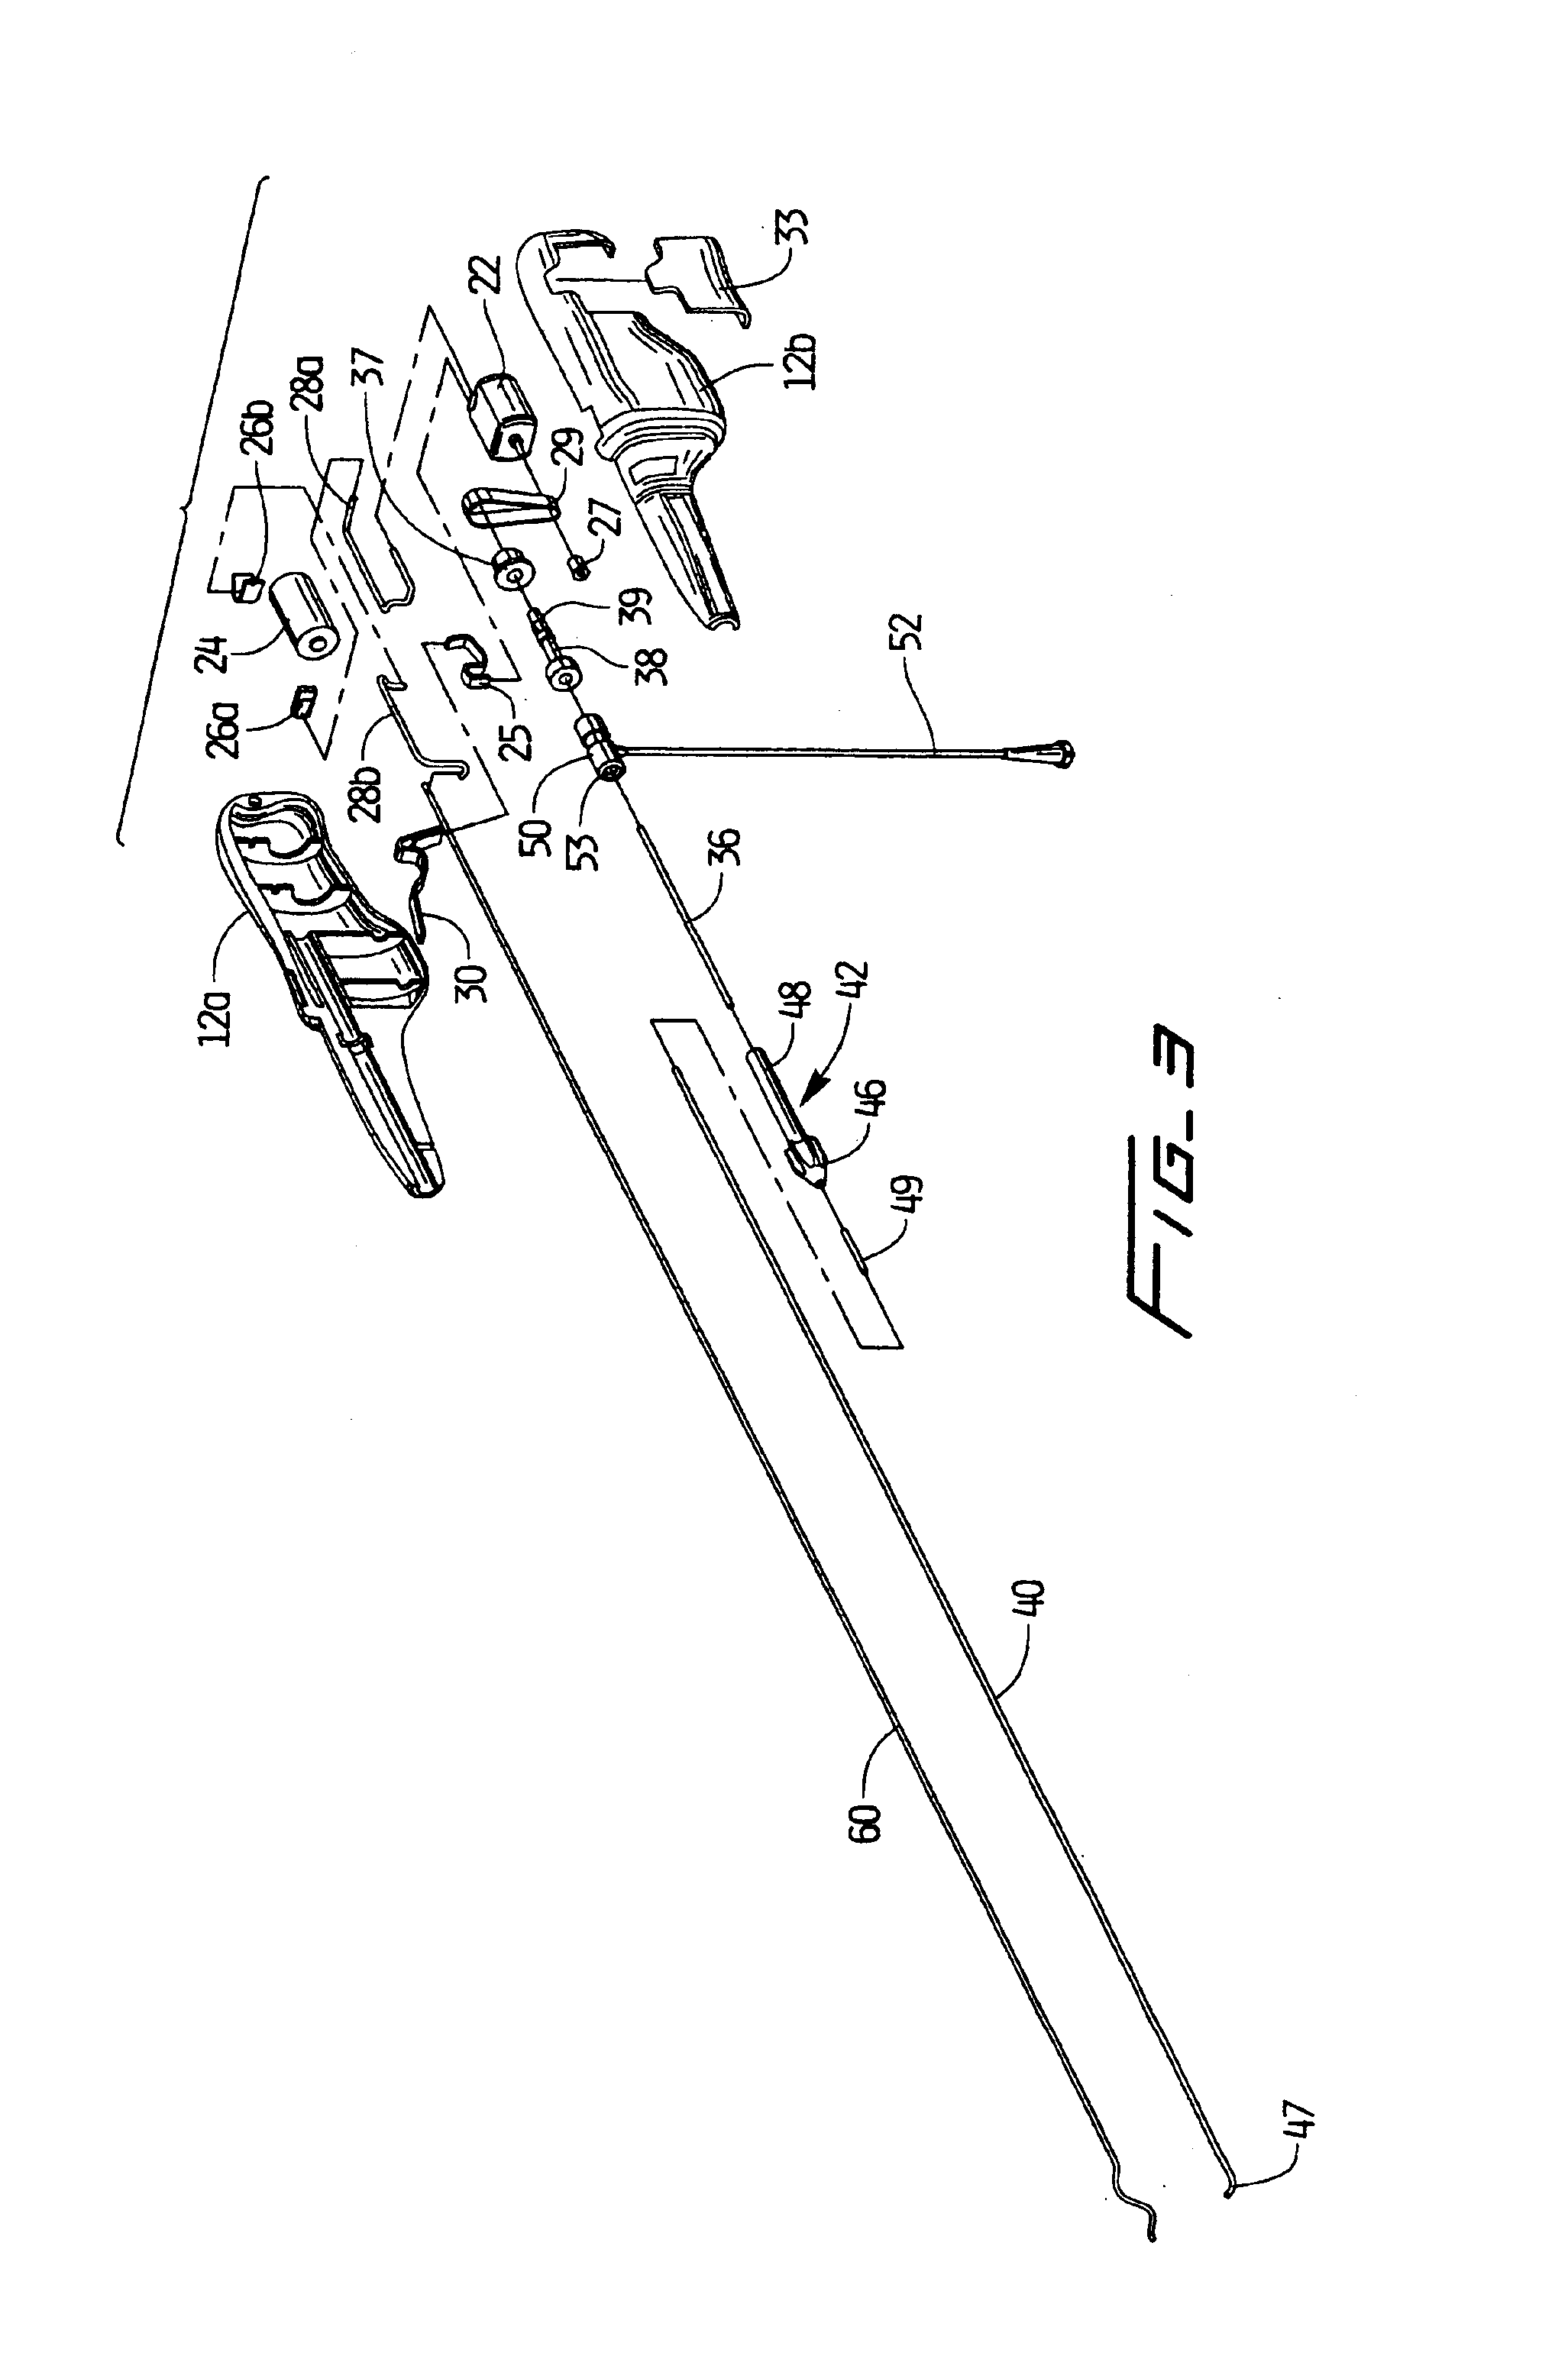 Rotational thrombectomy device